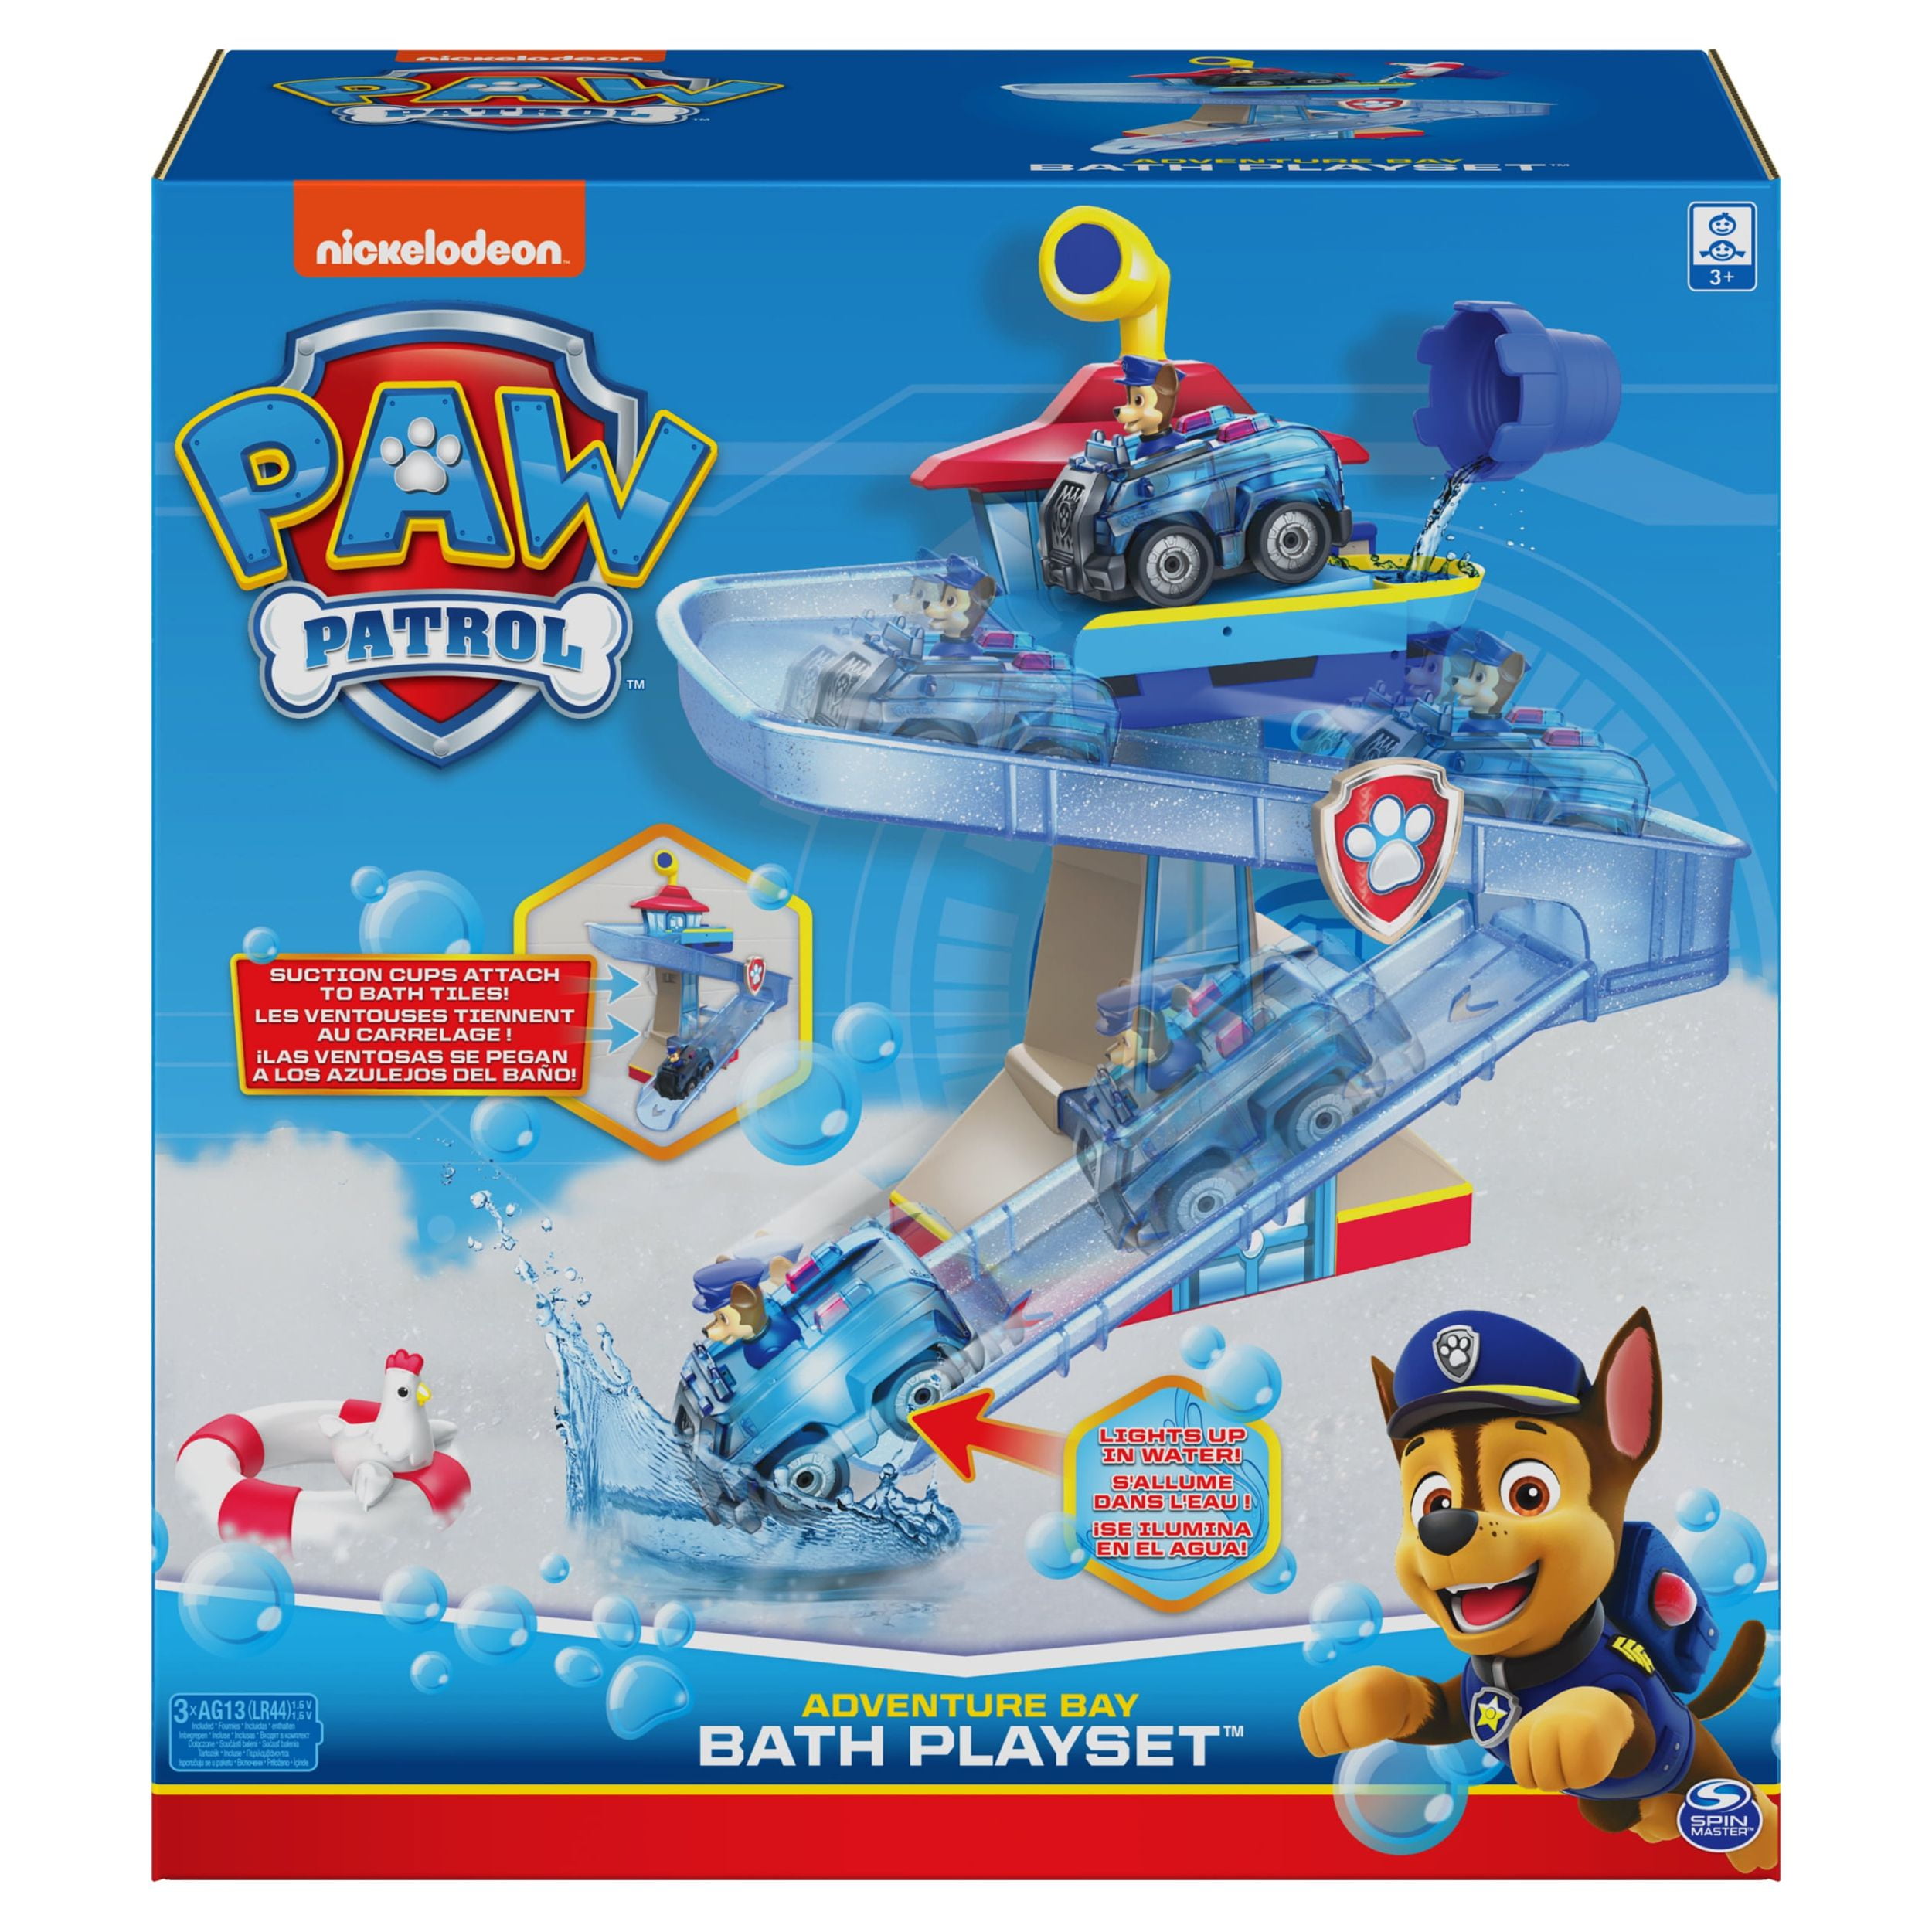 Paw Patrol, 3 and Playset Bay Light-up Bath Vehicle, Aged up Chase Toy with for Adventure Bath Kids